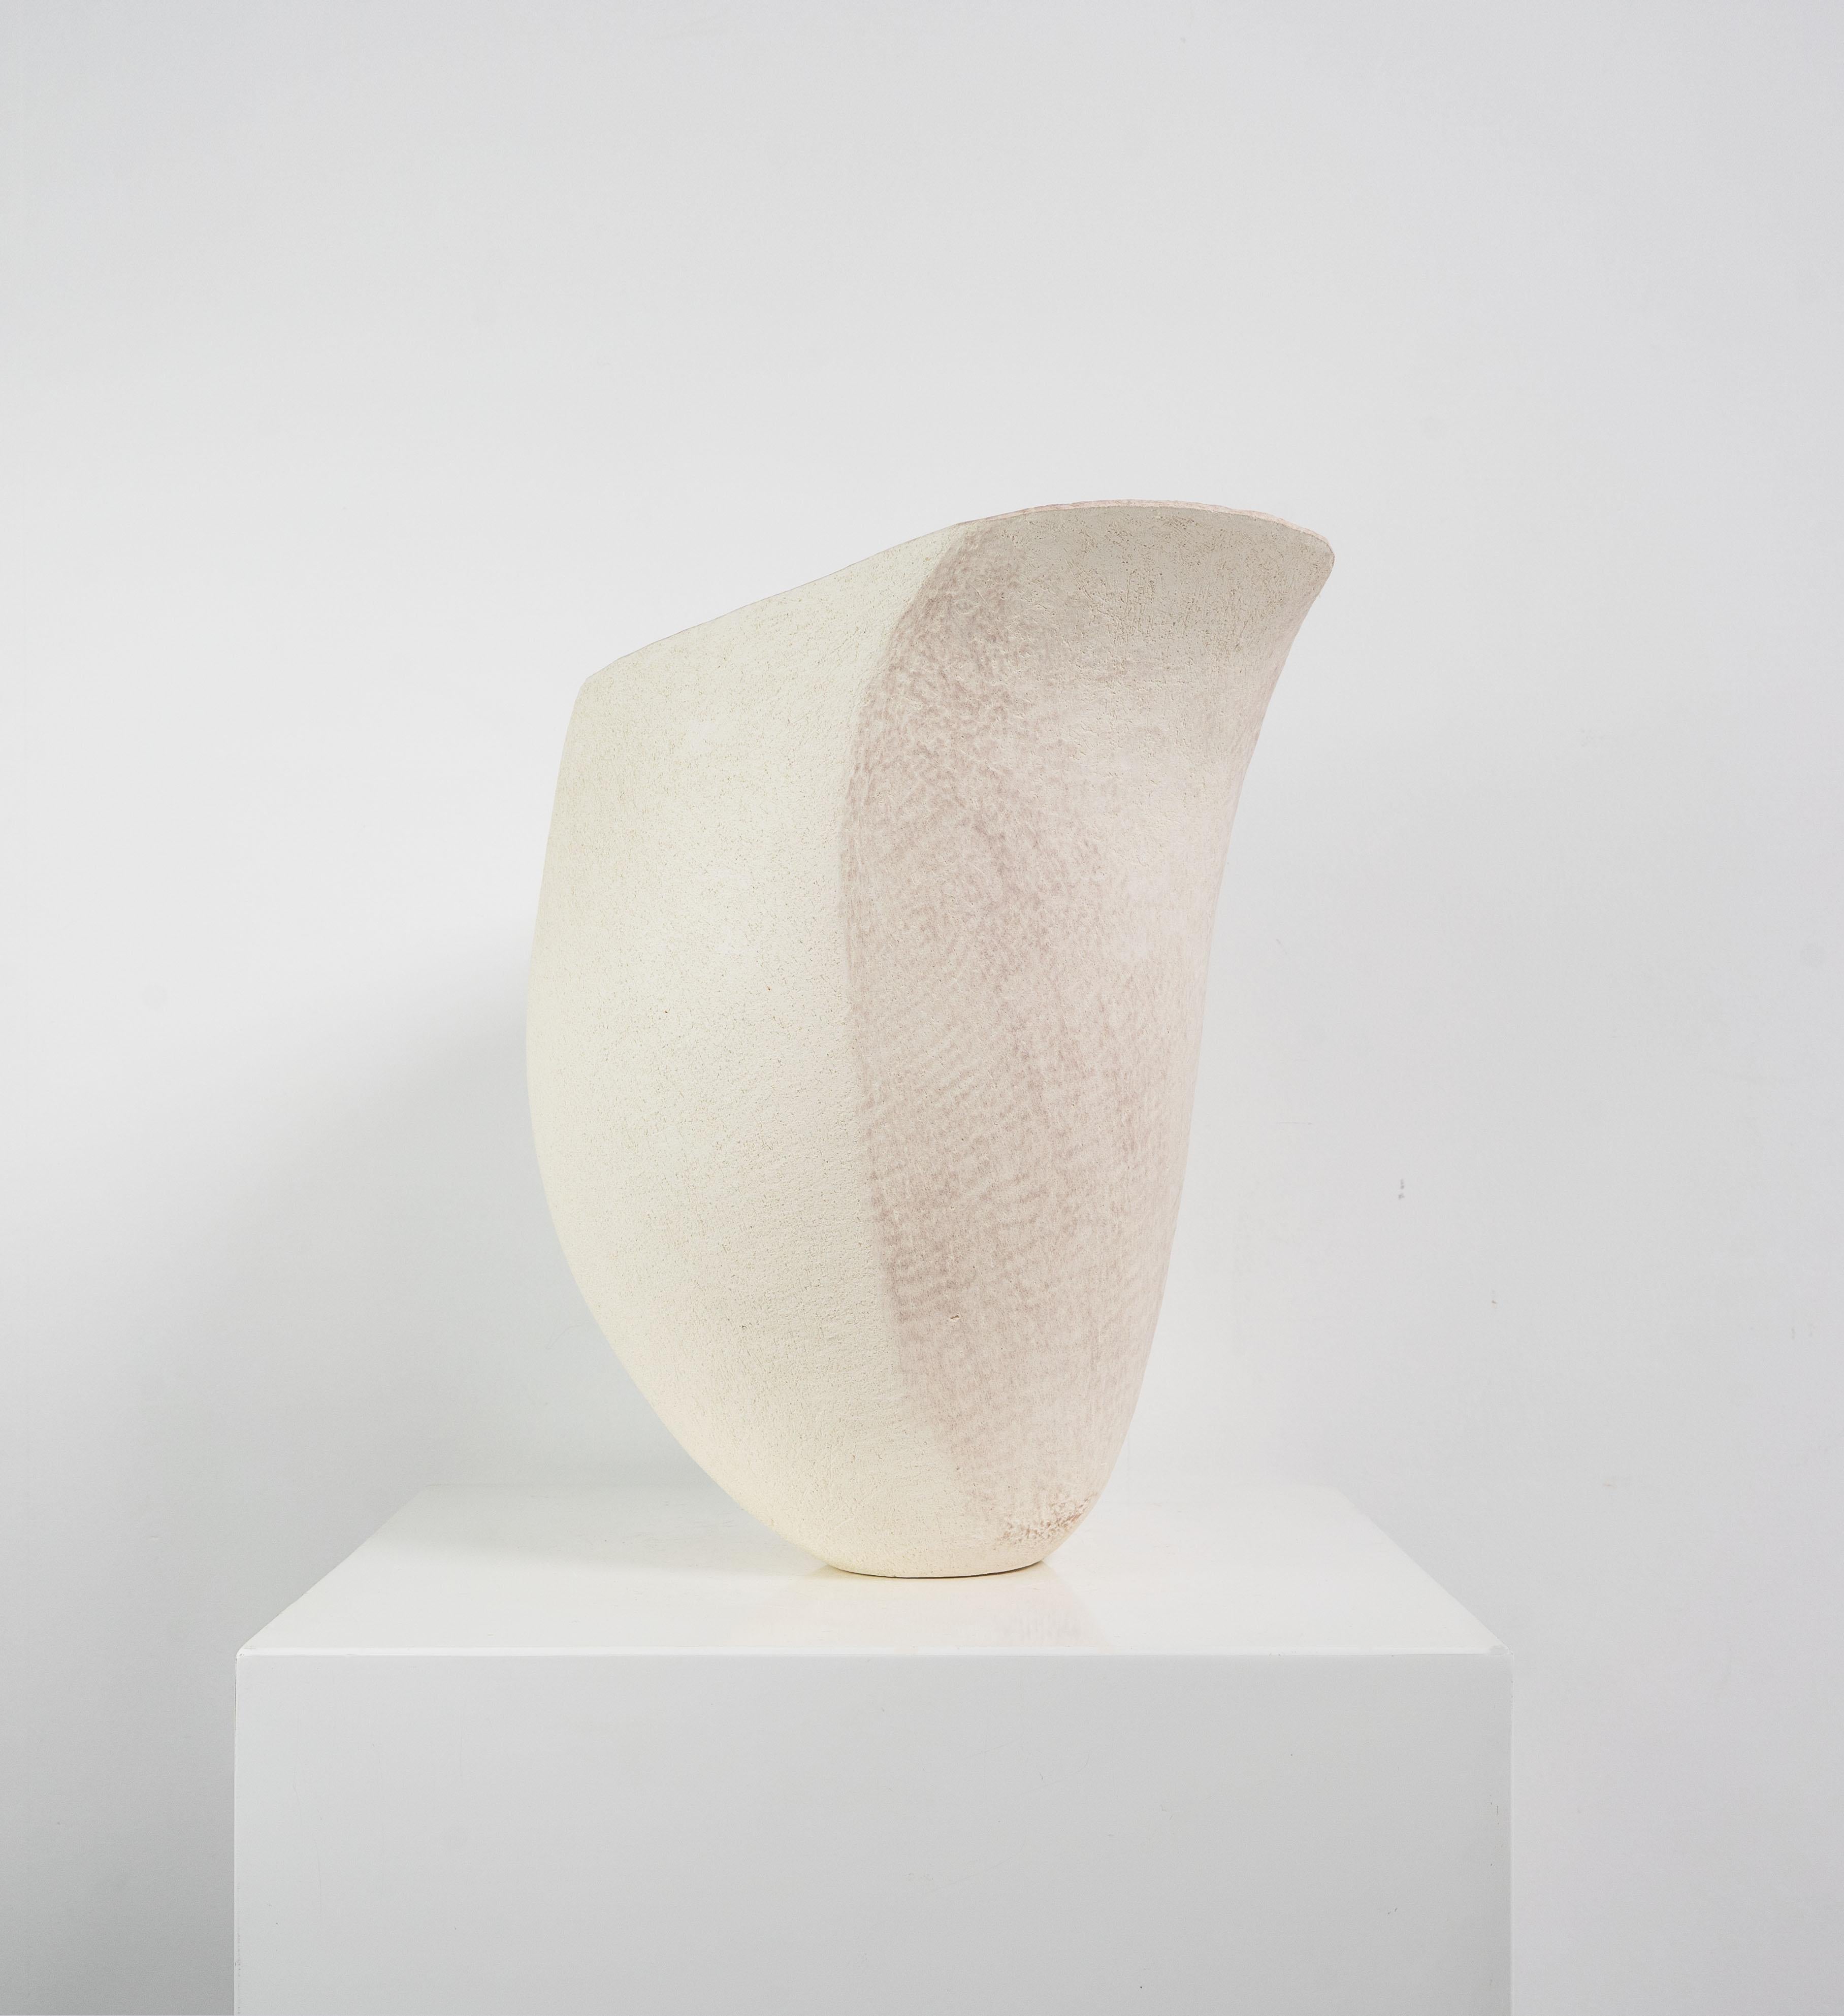 A large vessel hand built in stoneware by Betty Blandino (1927-2011). An asymmetrical form with a lilac coloured panel over a textured surface, impressed with the potter's mark to the base.

Born in London in 1927, Blandino became a full time